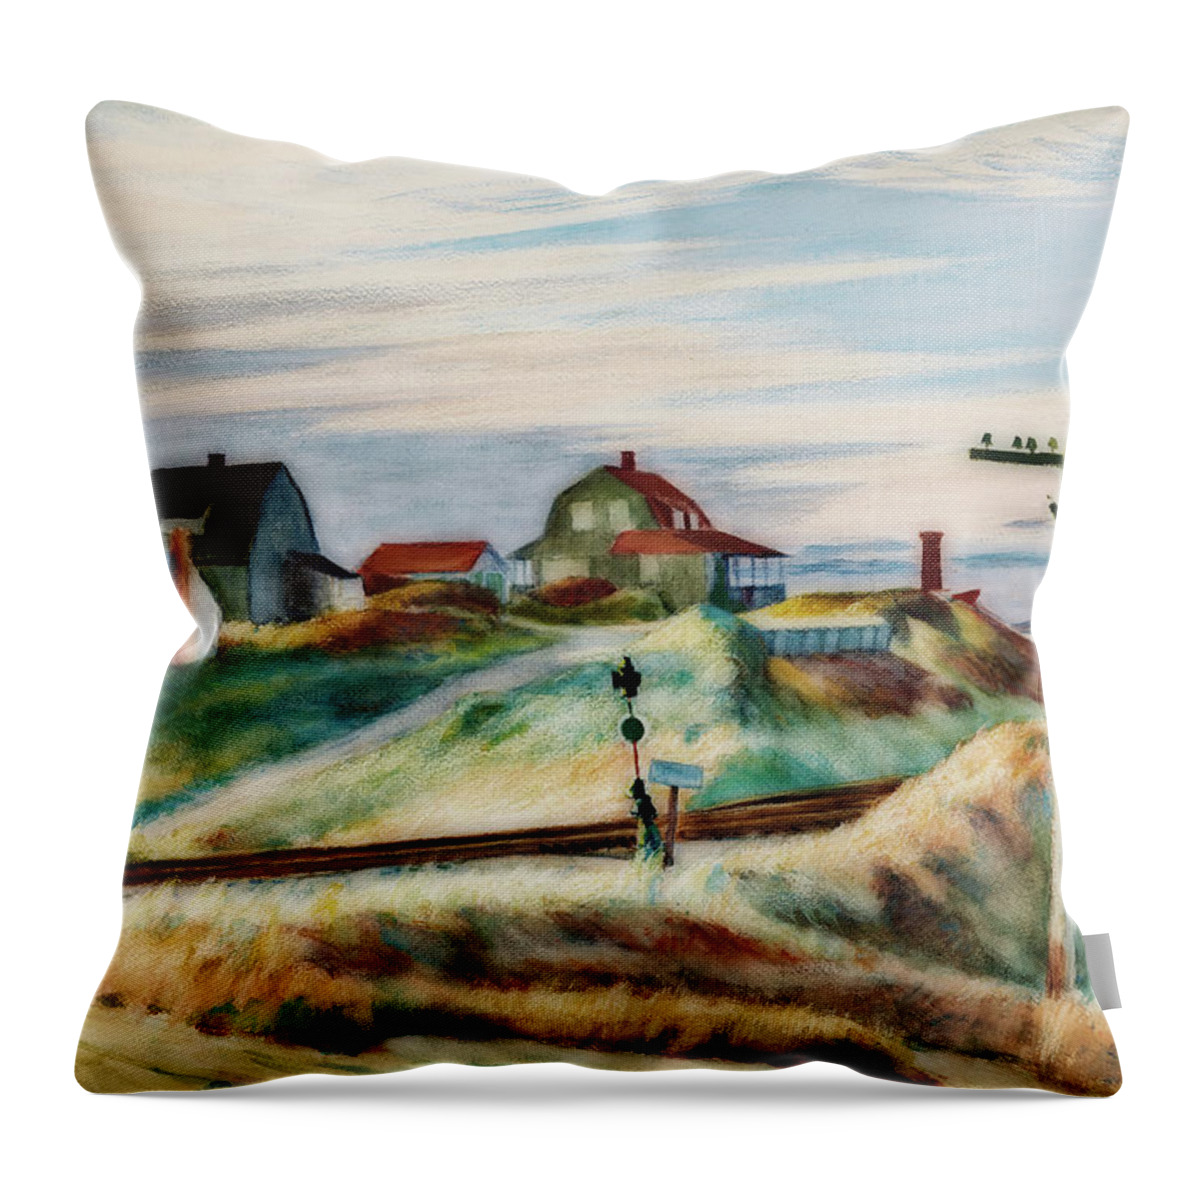 Painting Throw Pillow featuring the painting Cottages At North Truro by Mountain Dreams